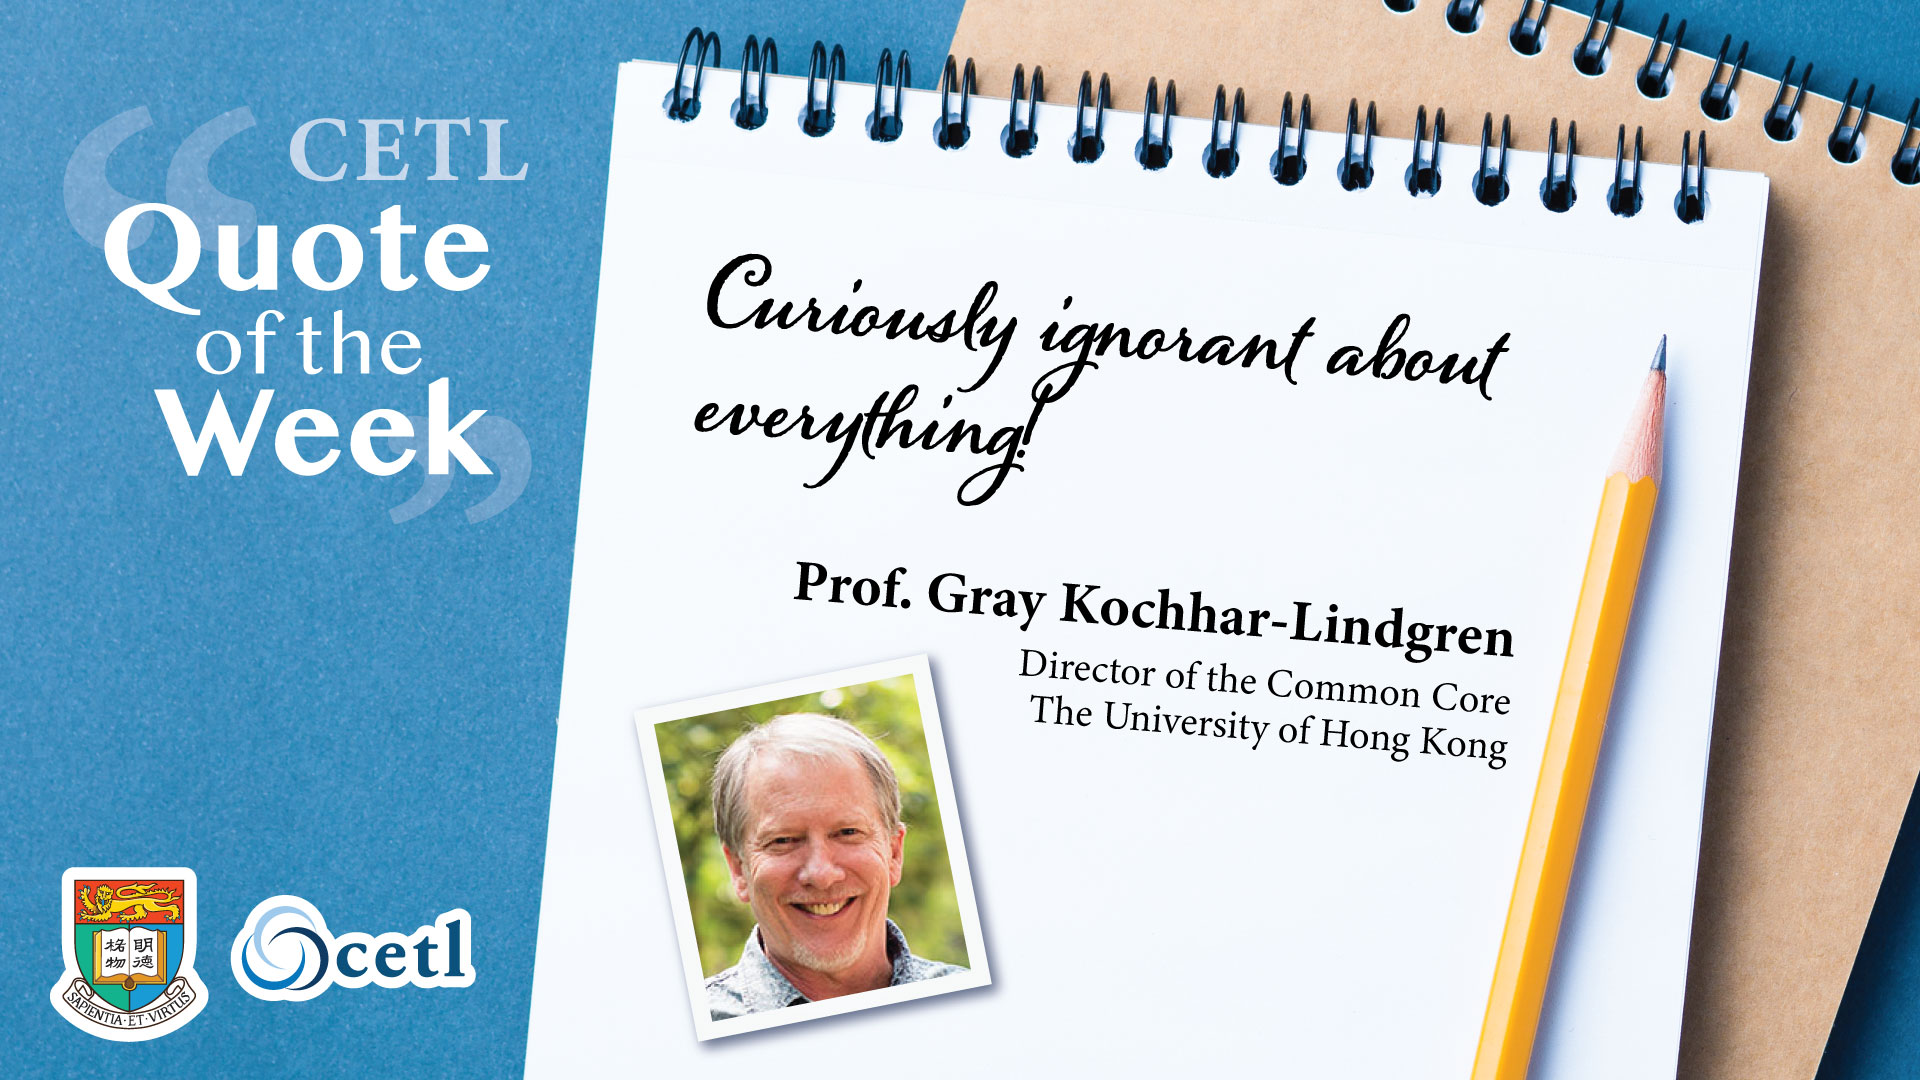 Prof. Gray Kochhar-Lindgren - Curiously ignorant about everything!